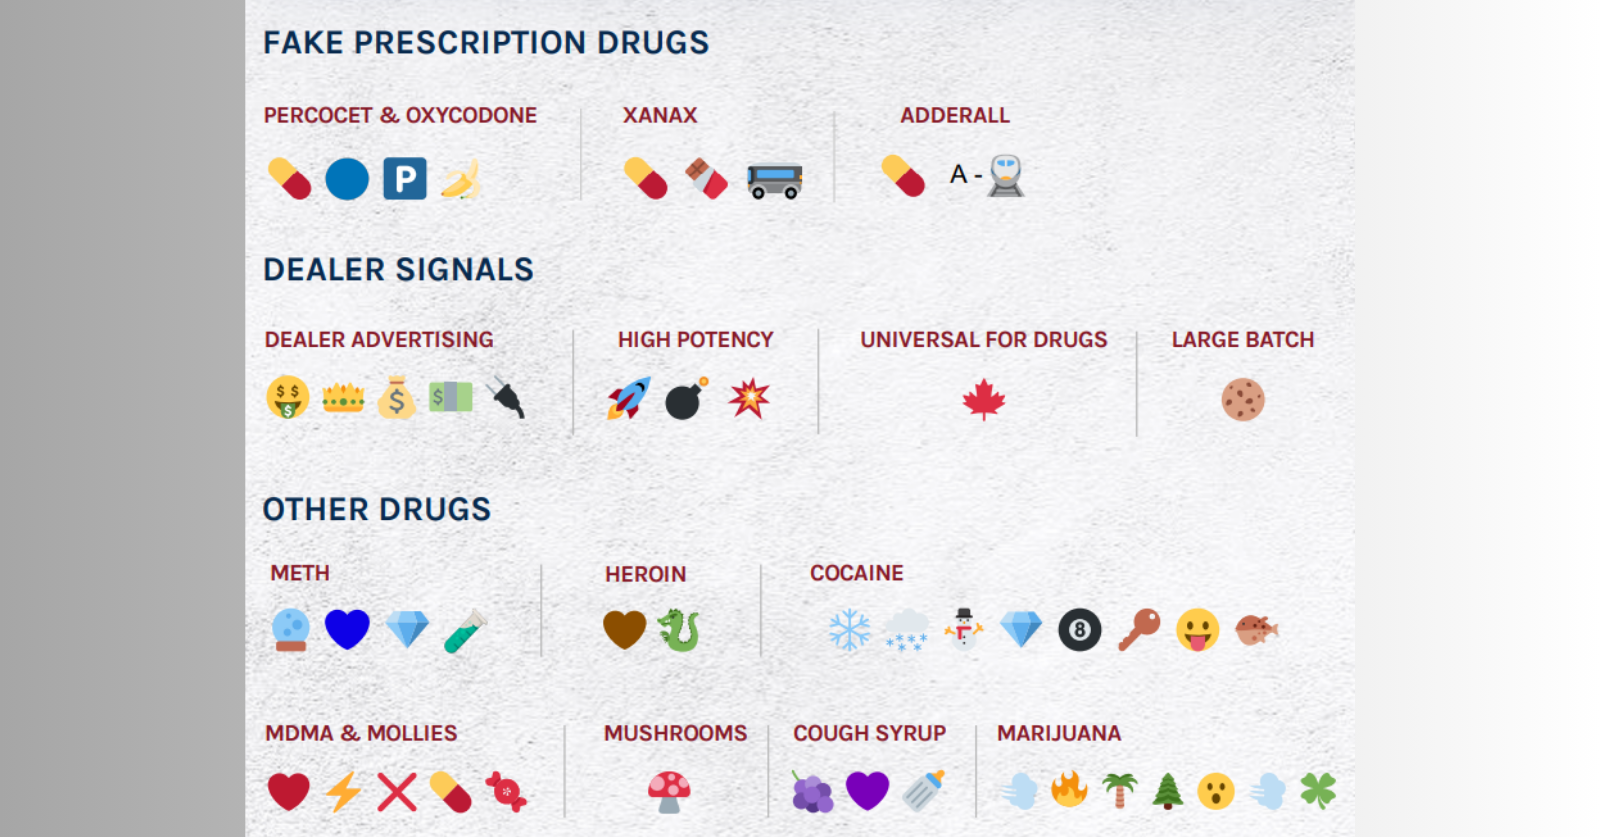 DEA warns public about emojis used for drugs